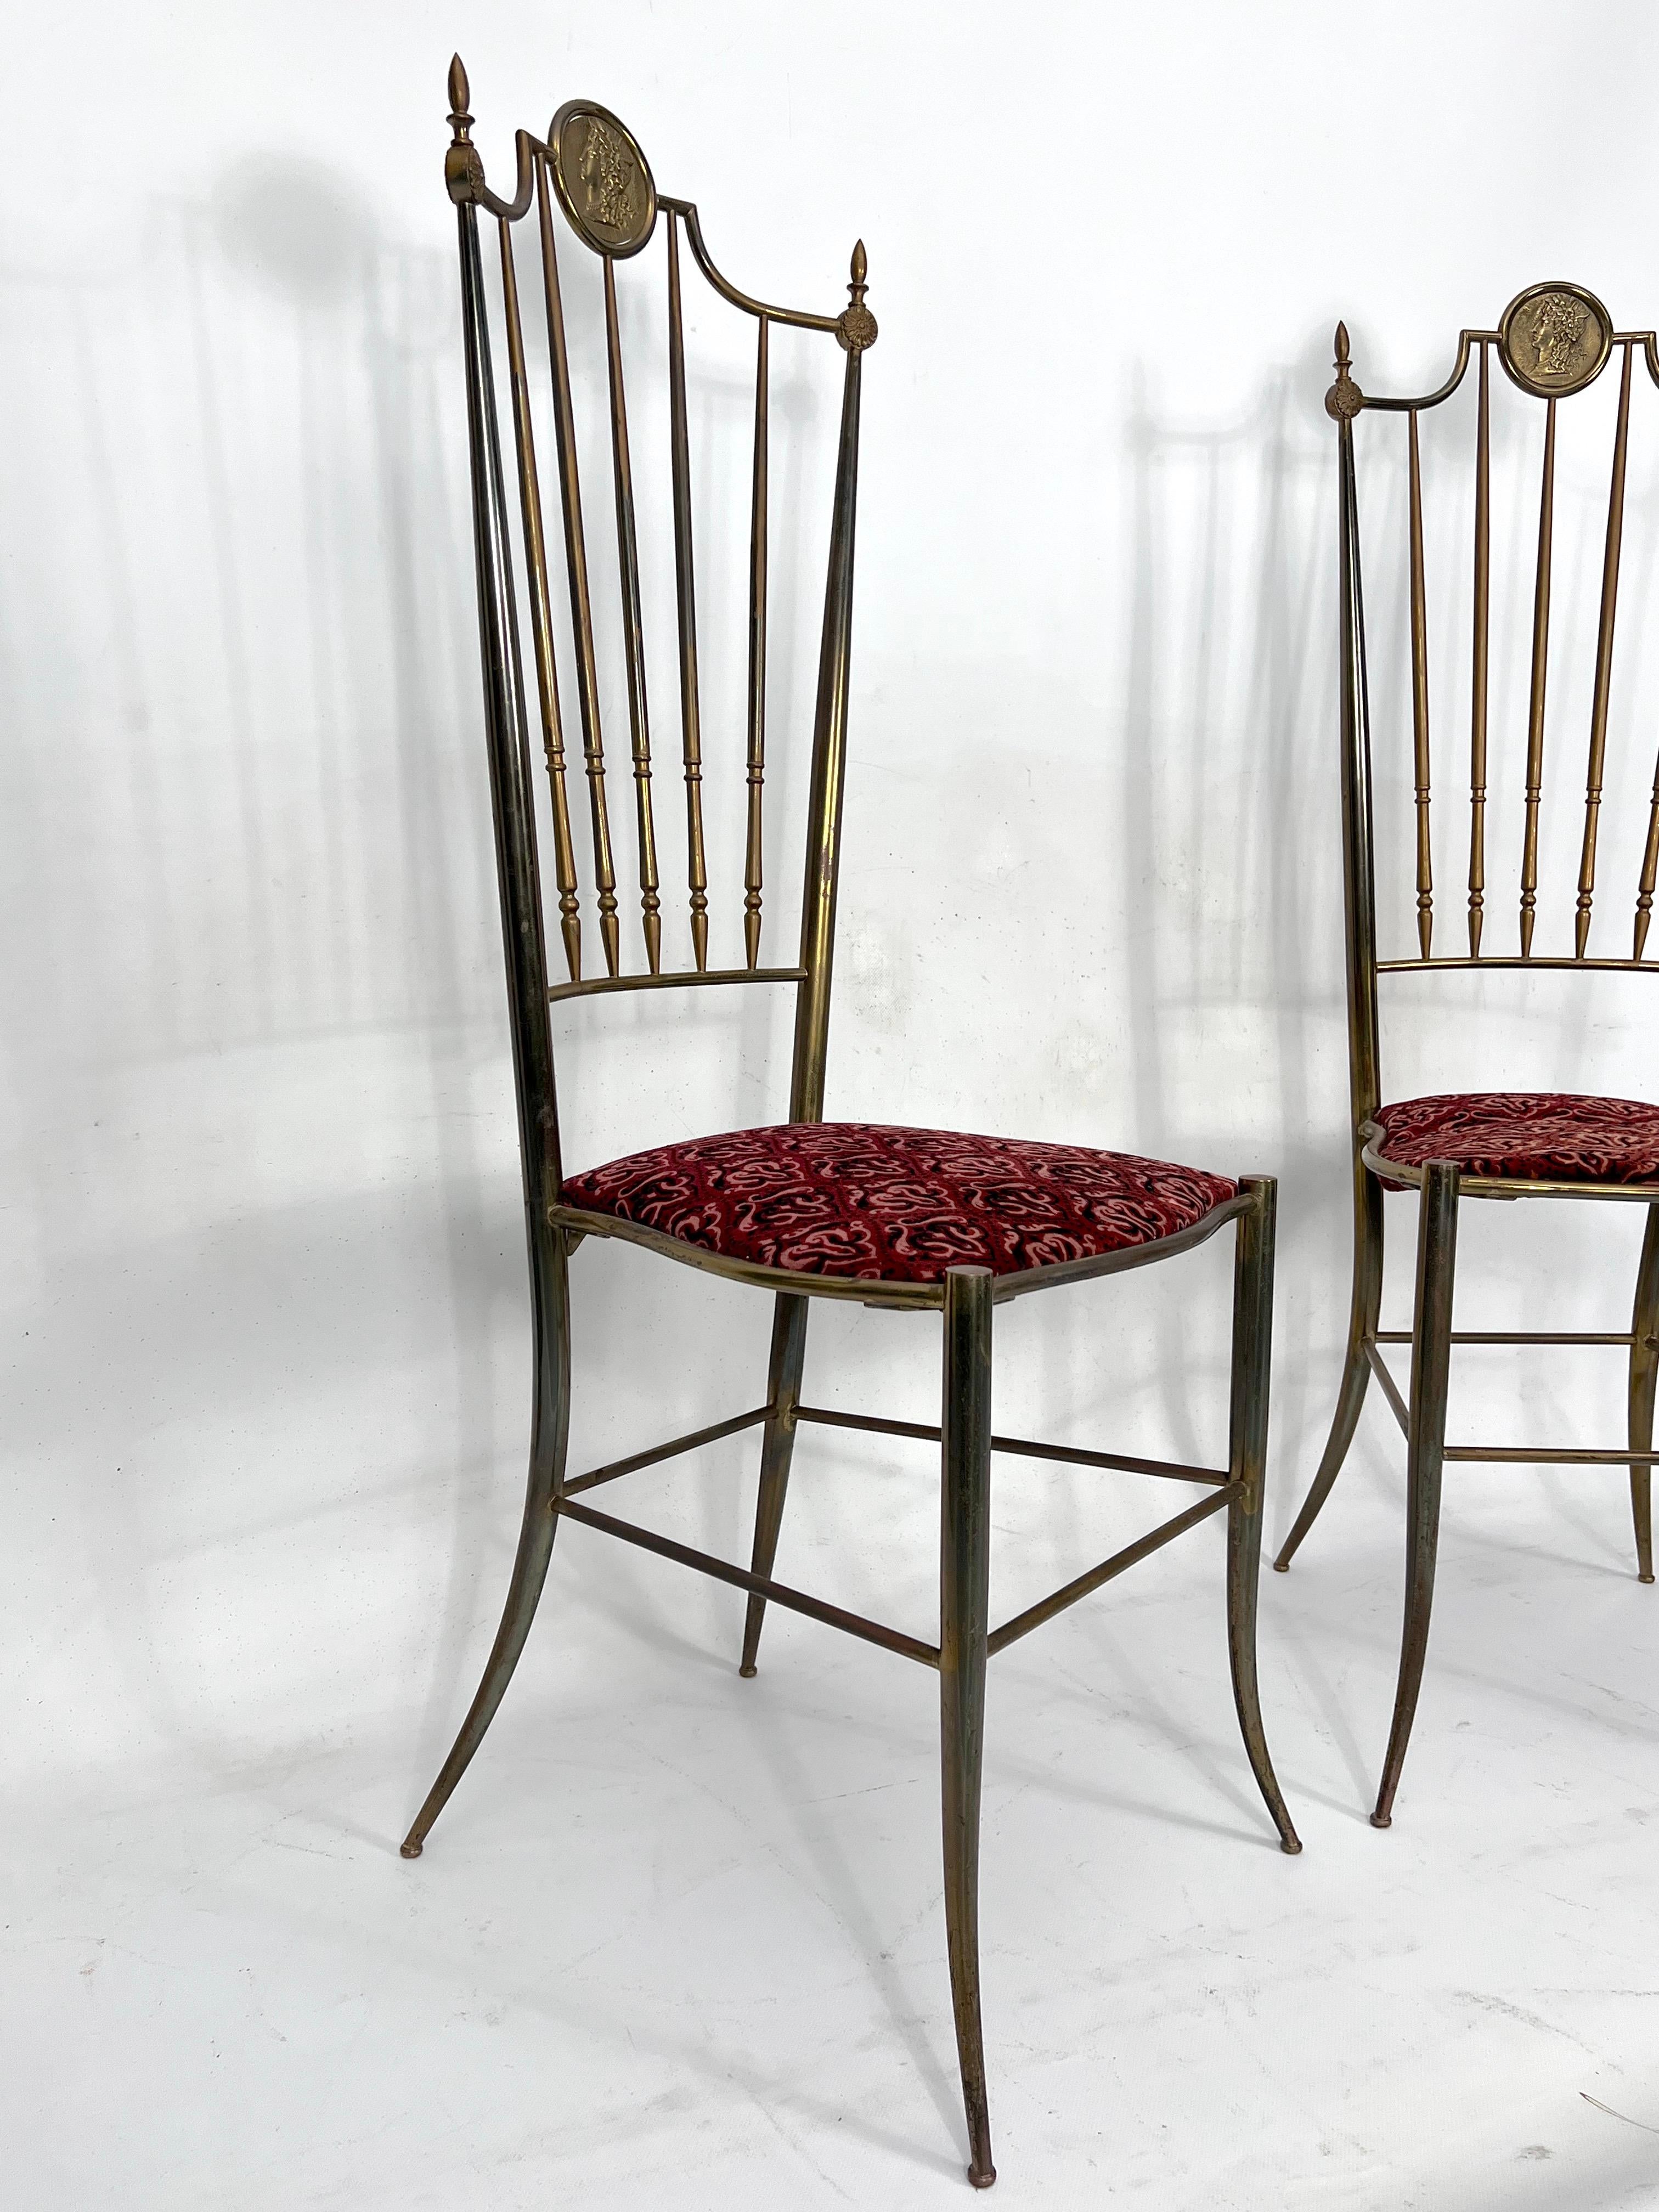 Vintage Pair of Brass Tall Chairs from Chiavari, Italy, 1950s In Good Condition For Sale In Catania, CT